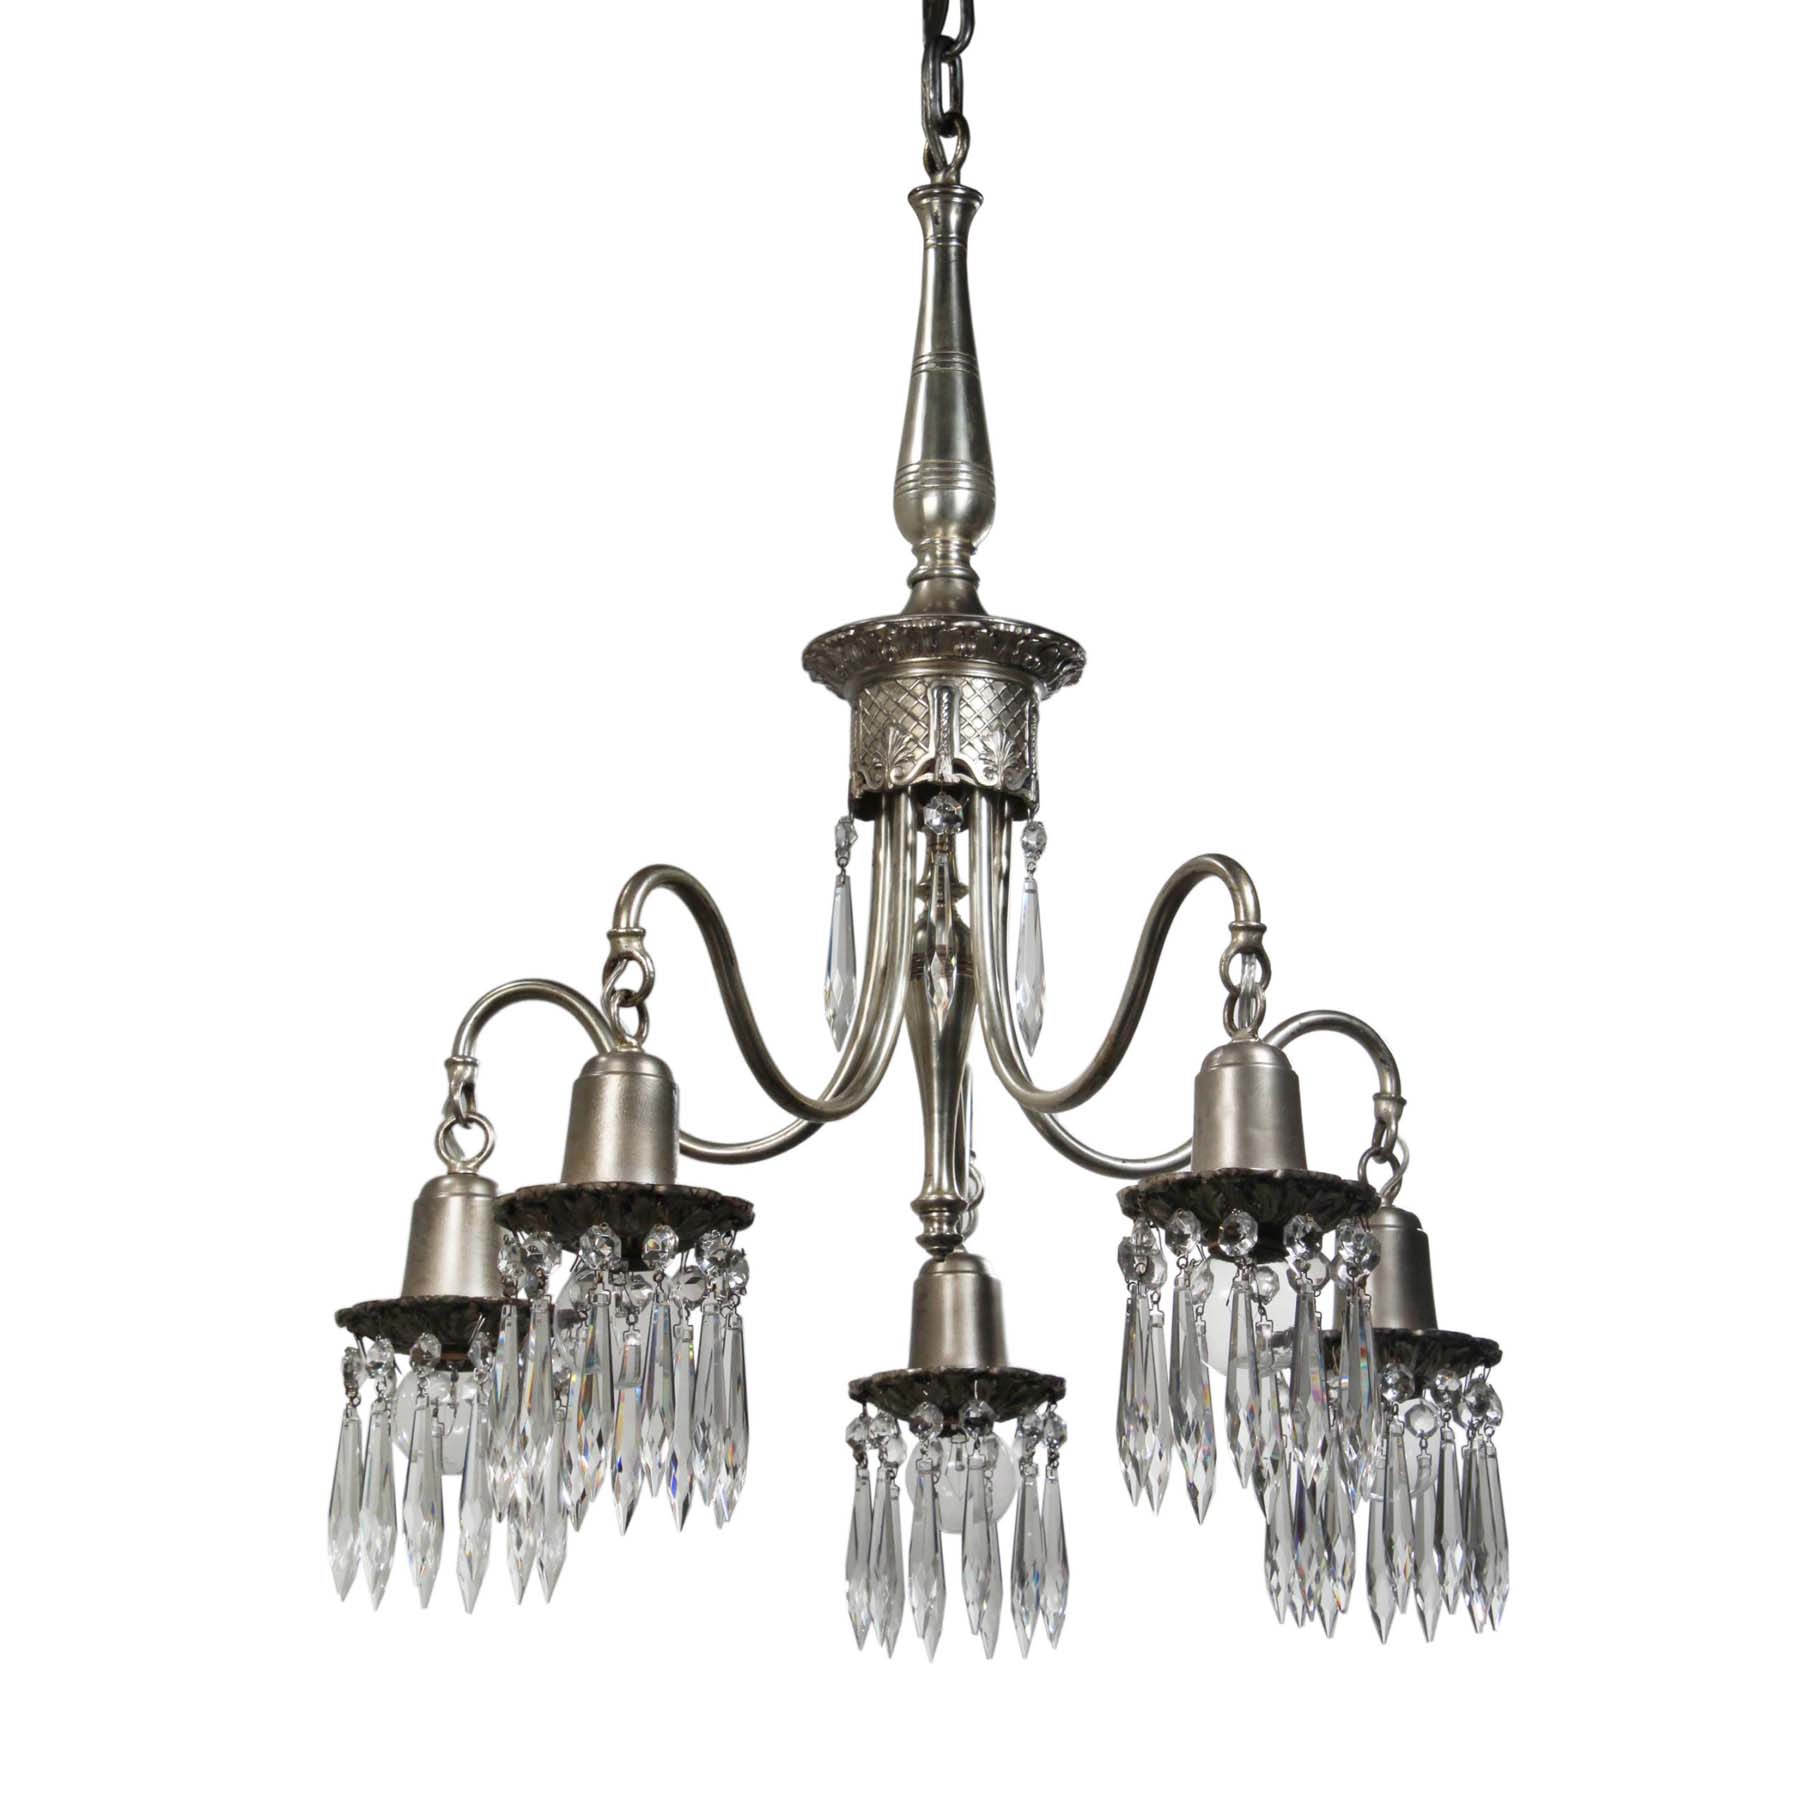 SOLD Antique Neoclassical Silver Plate Chandelier with Prisms, Star Chandelier Co. -0